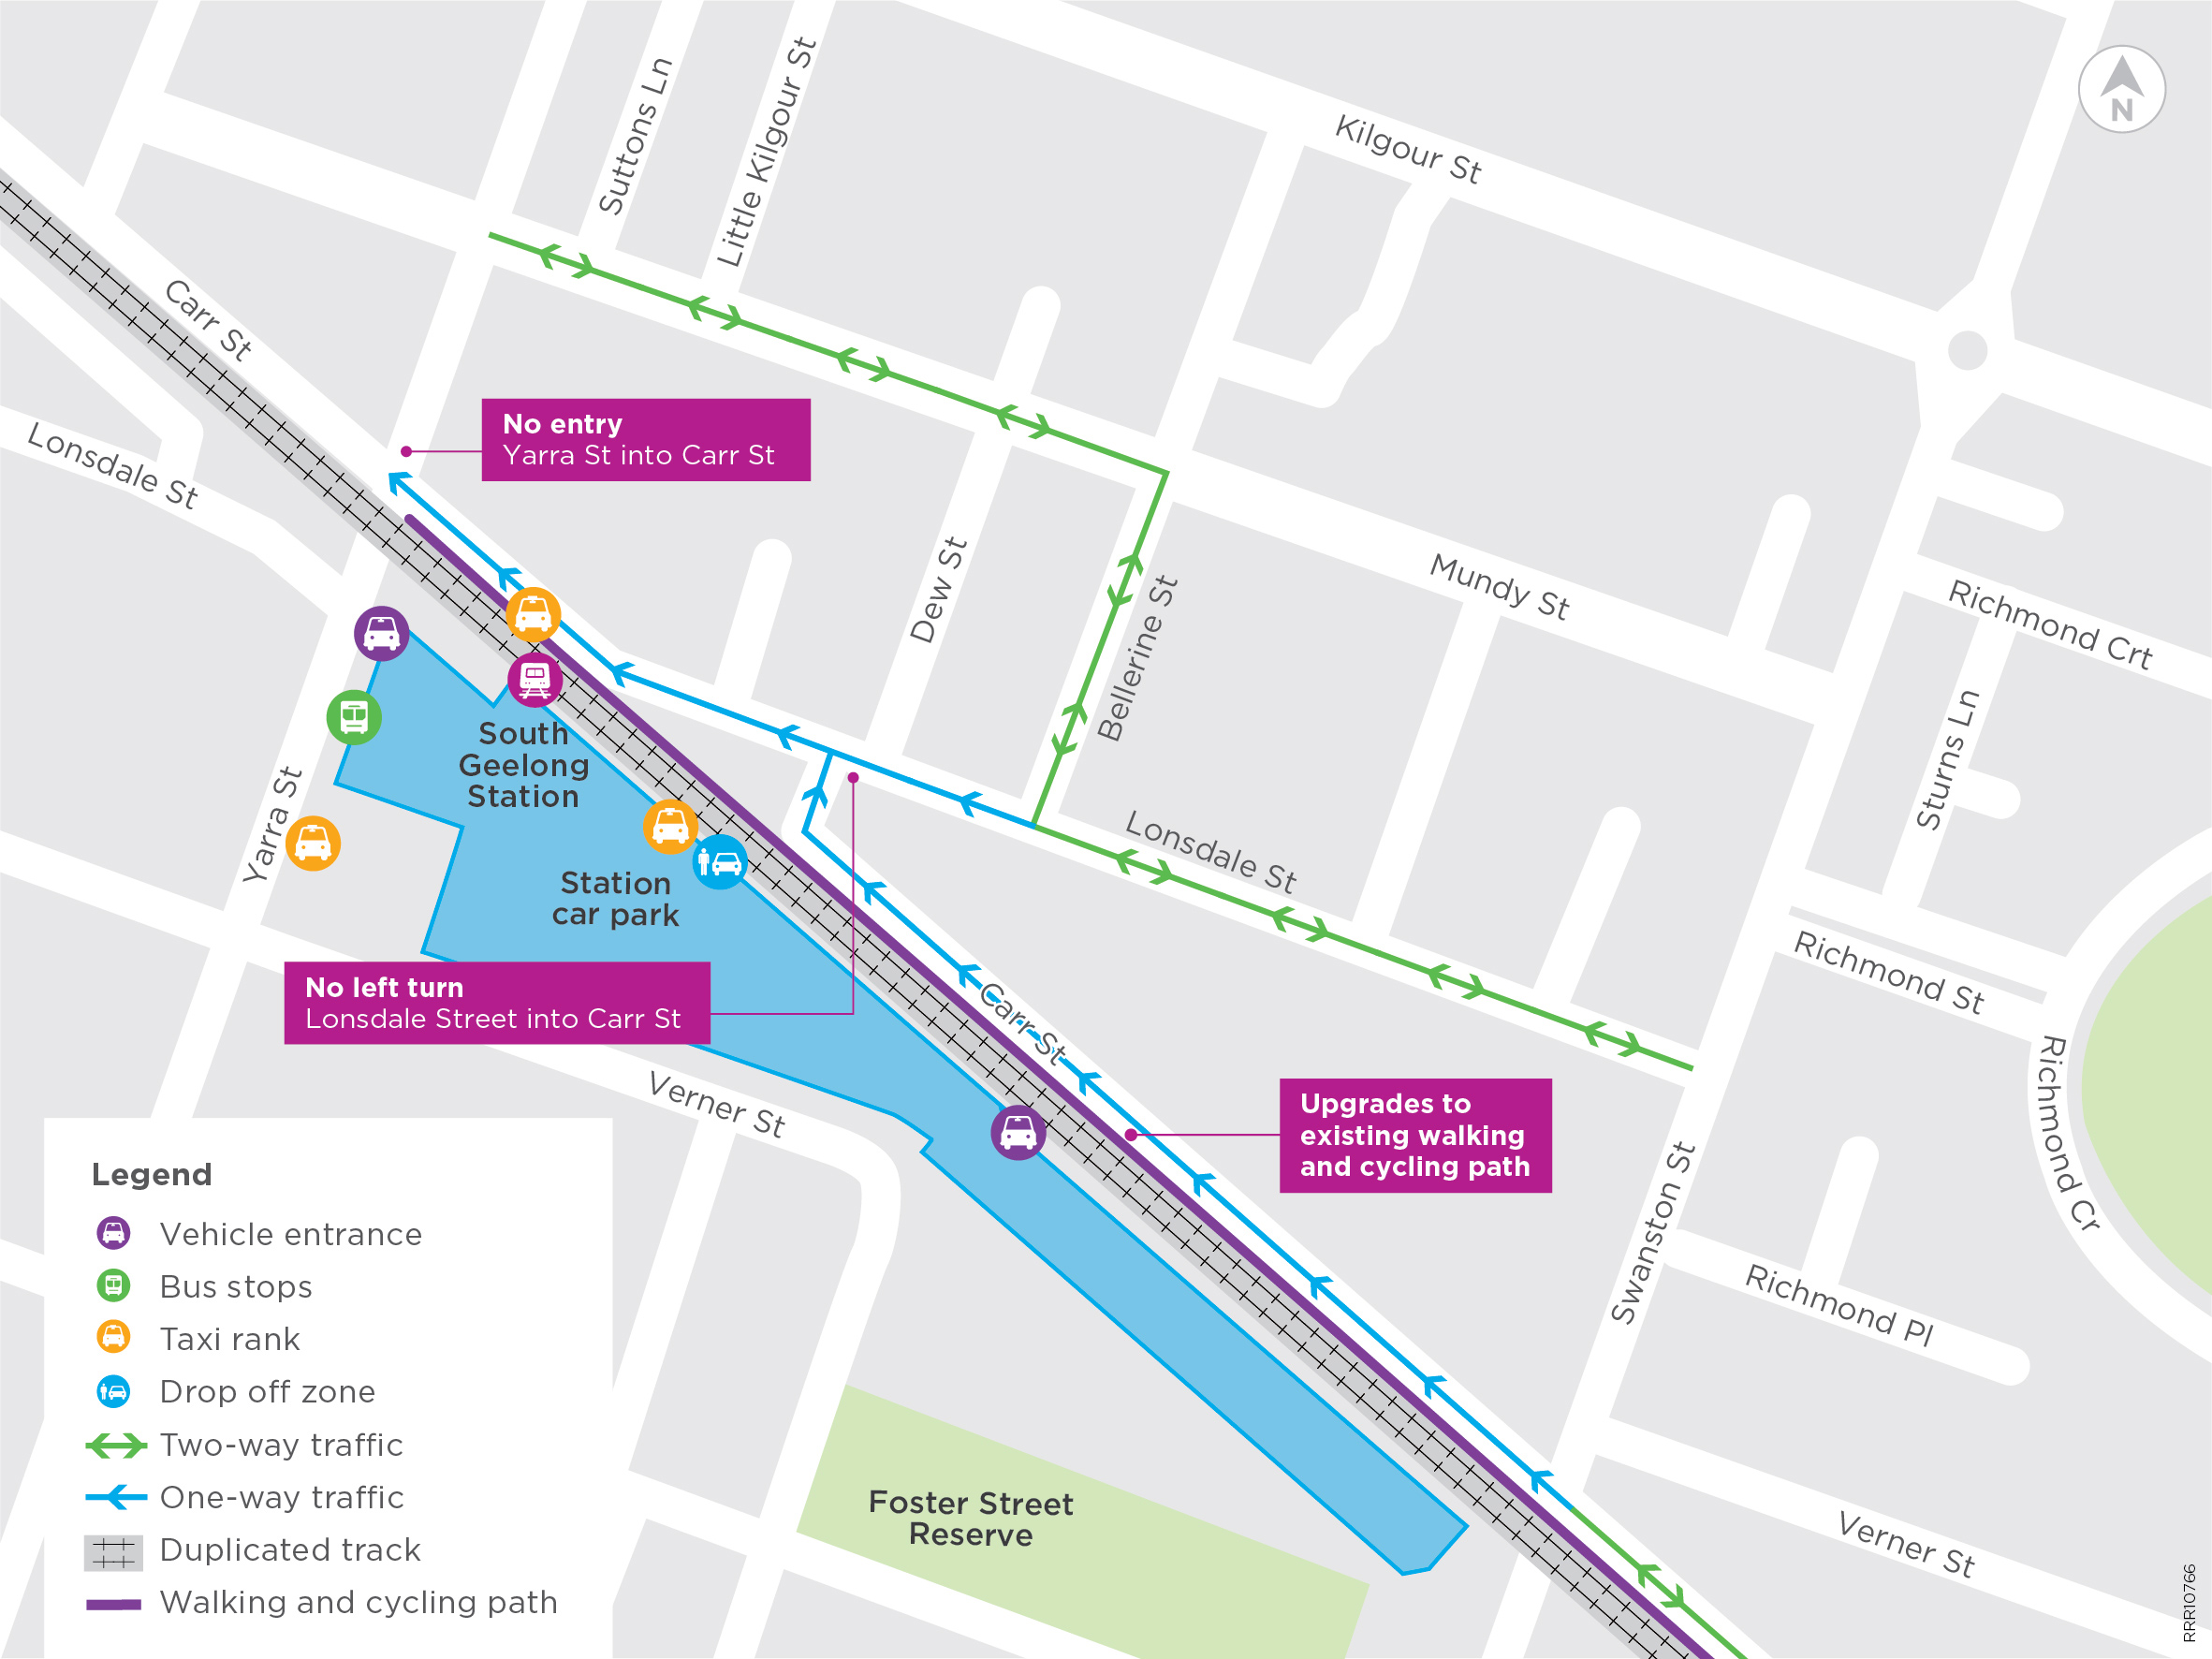 a map of the new road layout surrounding South Geelong Station. The map captures the area between Swanston Street and Yarra Street and Kilgour Street and Verner Street. The map depicts the direction of traffic along Lonsdale Street, Carr Street, Bellarine Street and Mundy Street. 